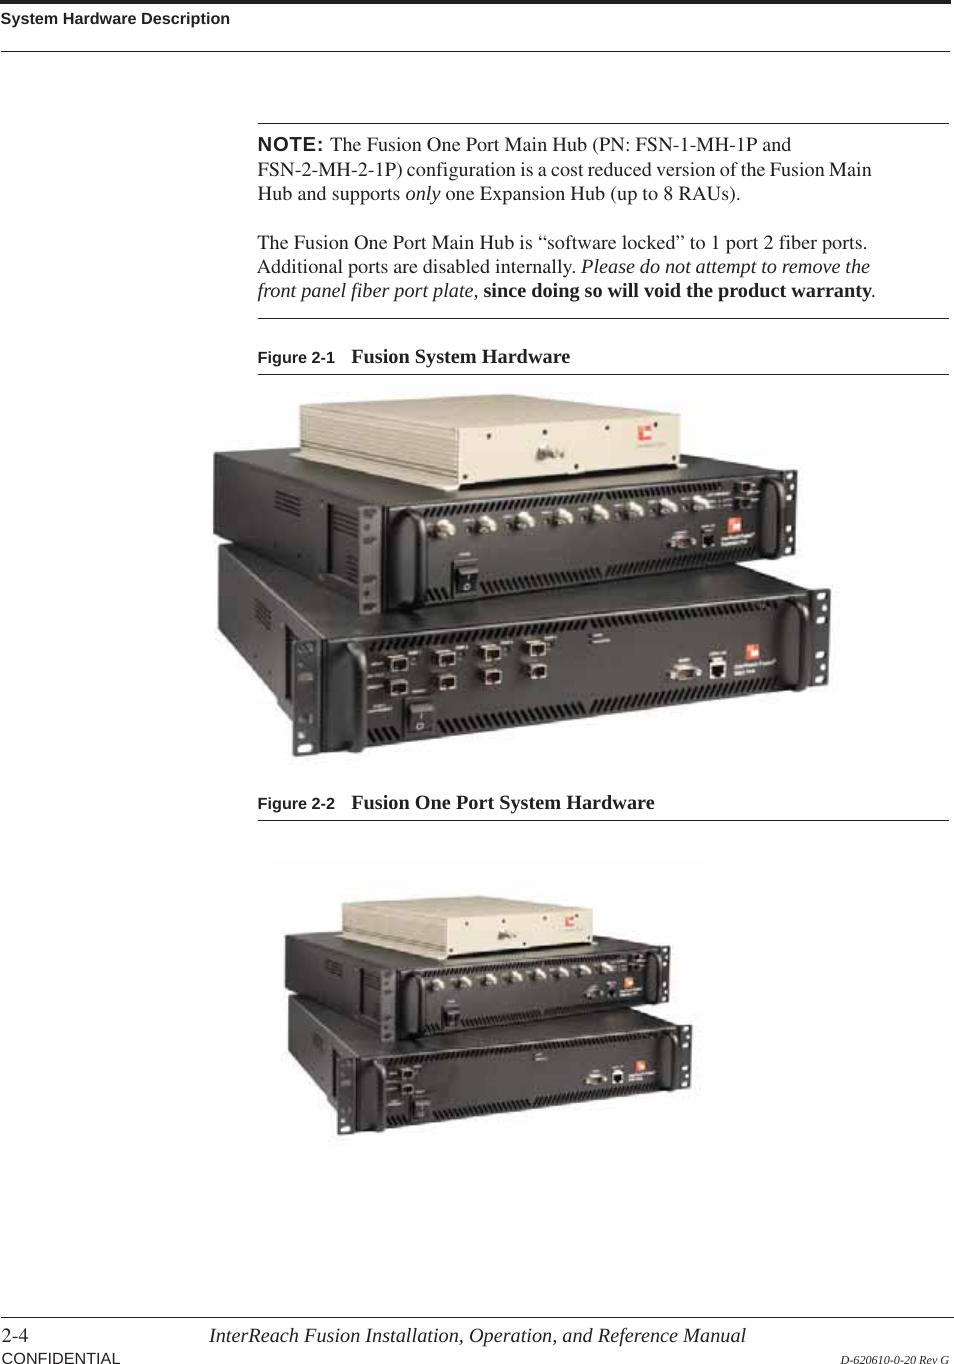 System Hardware Description2-4 InterReach Fusion Installation, Operation, and Reference ManualCONFIDENTIAL D-620610-0-20 Rev GNOTE: The Fusion One Port Main Hub (PN: FSN-1-MH-1P and FSN-2-MH-2-1P) configuration is a cost reduced version of the Fusion Main Hub and supports only one Expansion Hub (up to 8 RAUs).  The Fusion One Port Main Hub is “software locked” to 1 port 2 fiber ports. Additional ports are disabled internally. Please do not attempt to remove the front panel fiber port plate, since doing so will void the product warranty.Figure 2-1 Fusion System HardwareFigure 2-2 Fusion One Port System Hardware